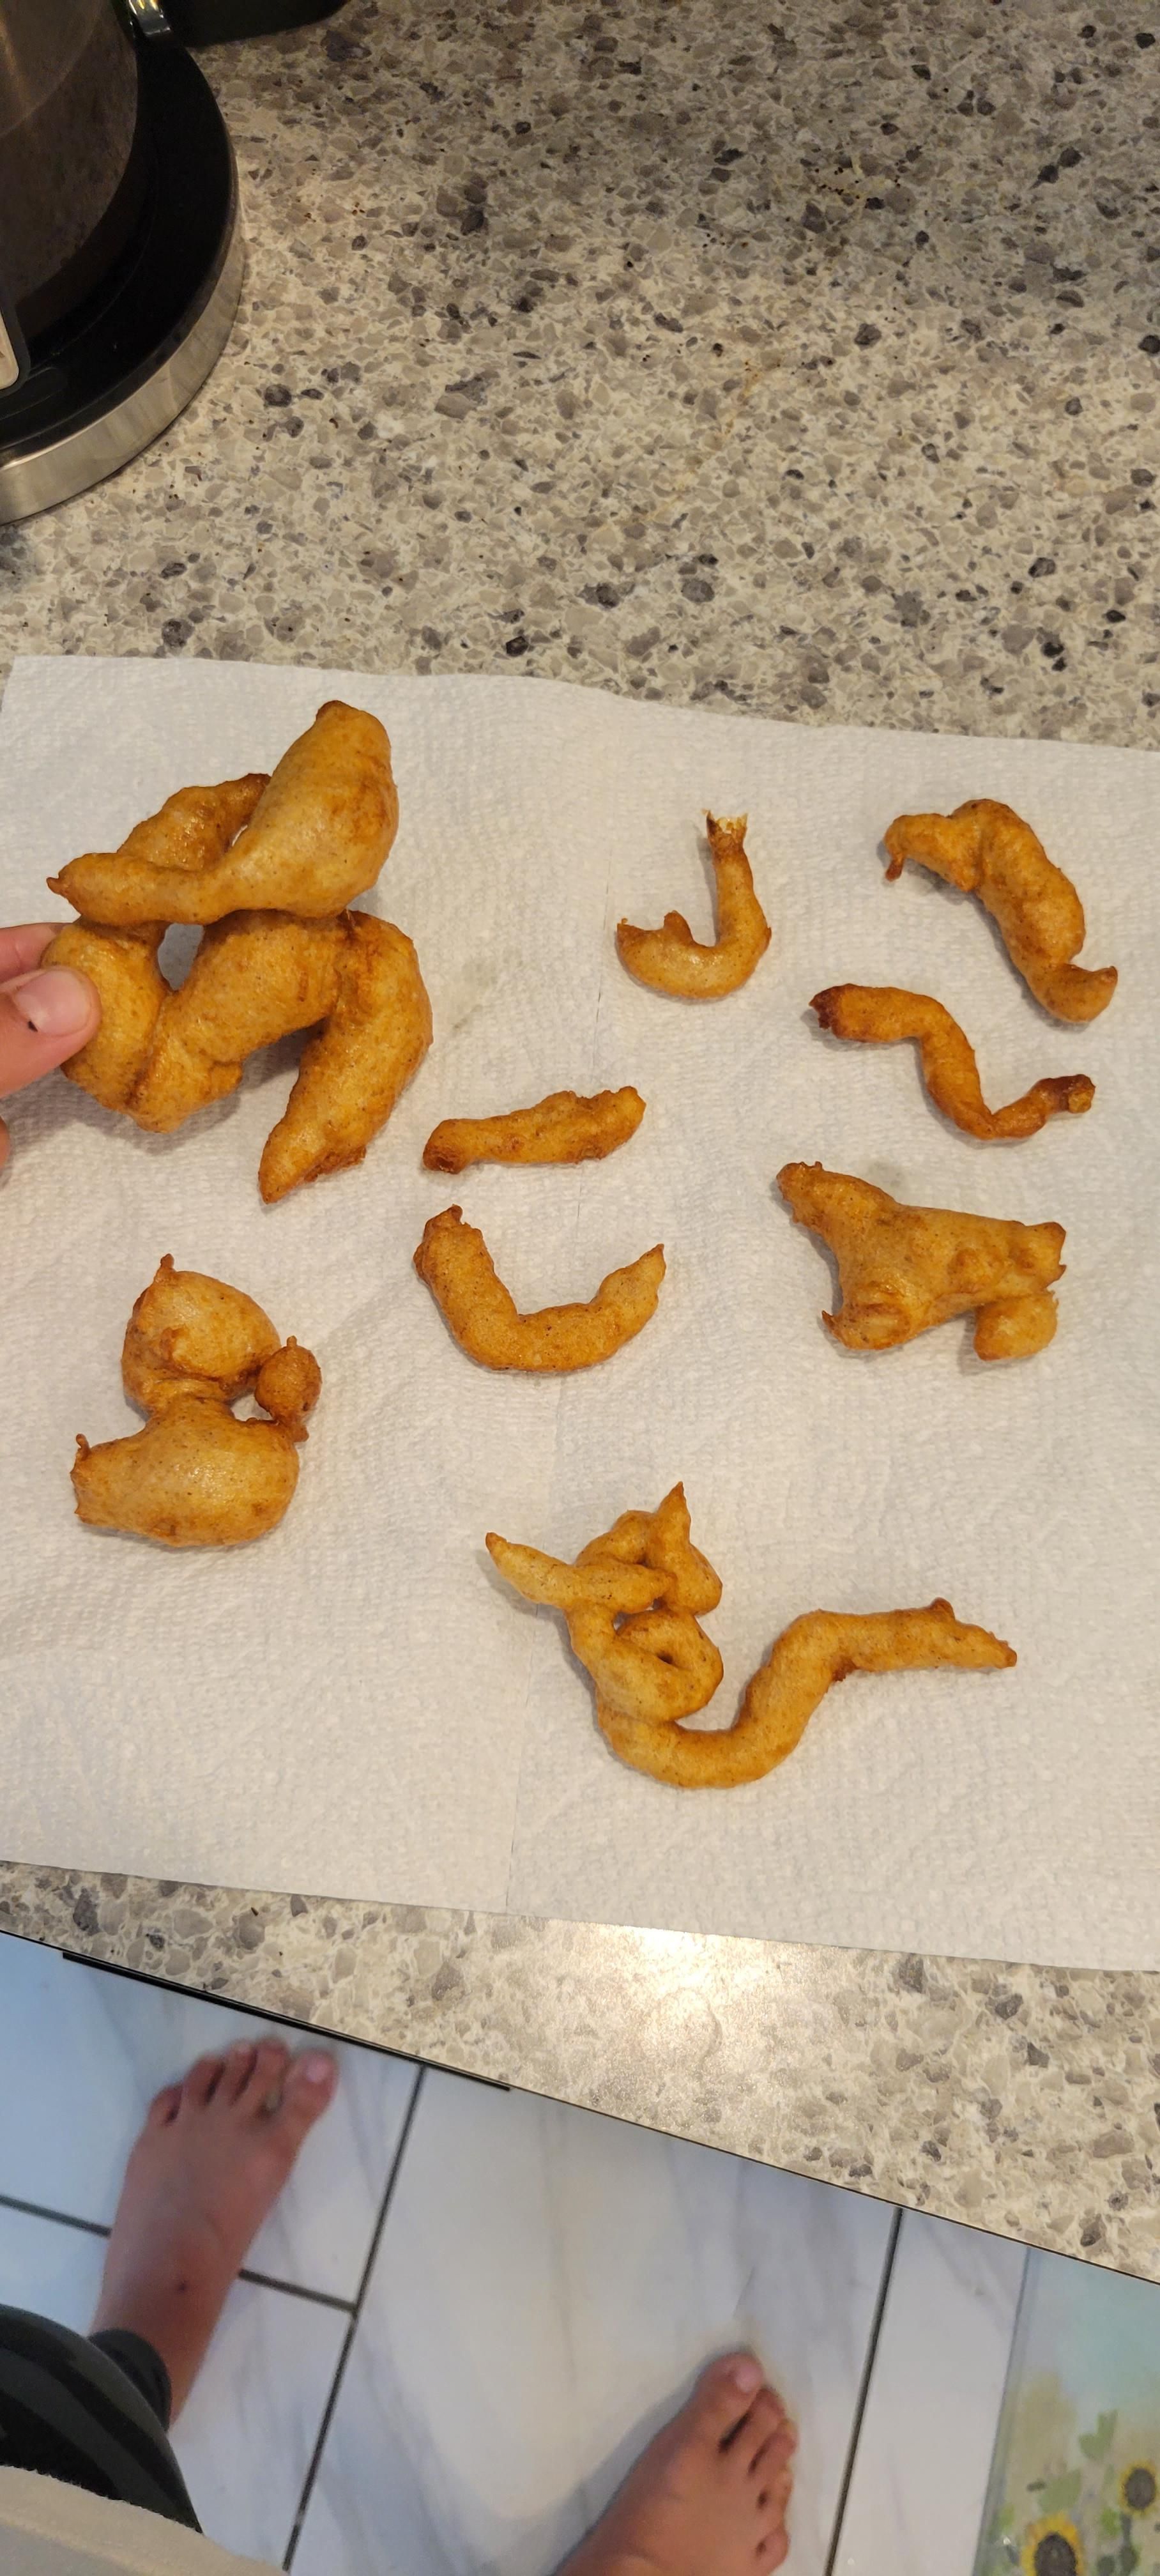 Tried making churros.. help me come up with the restaurant name, where I could proudly serve them